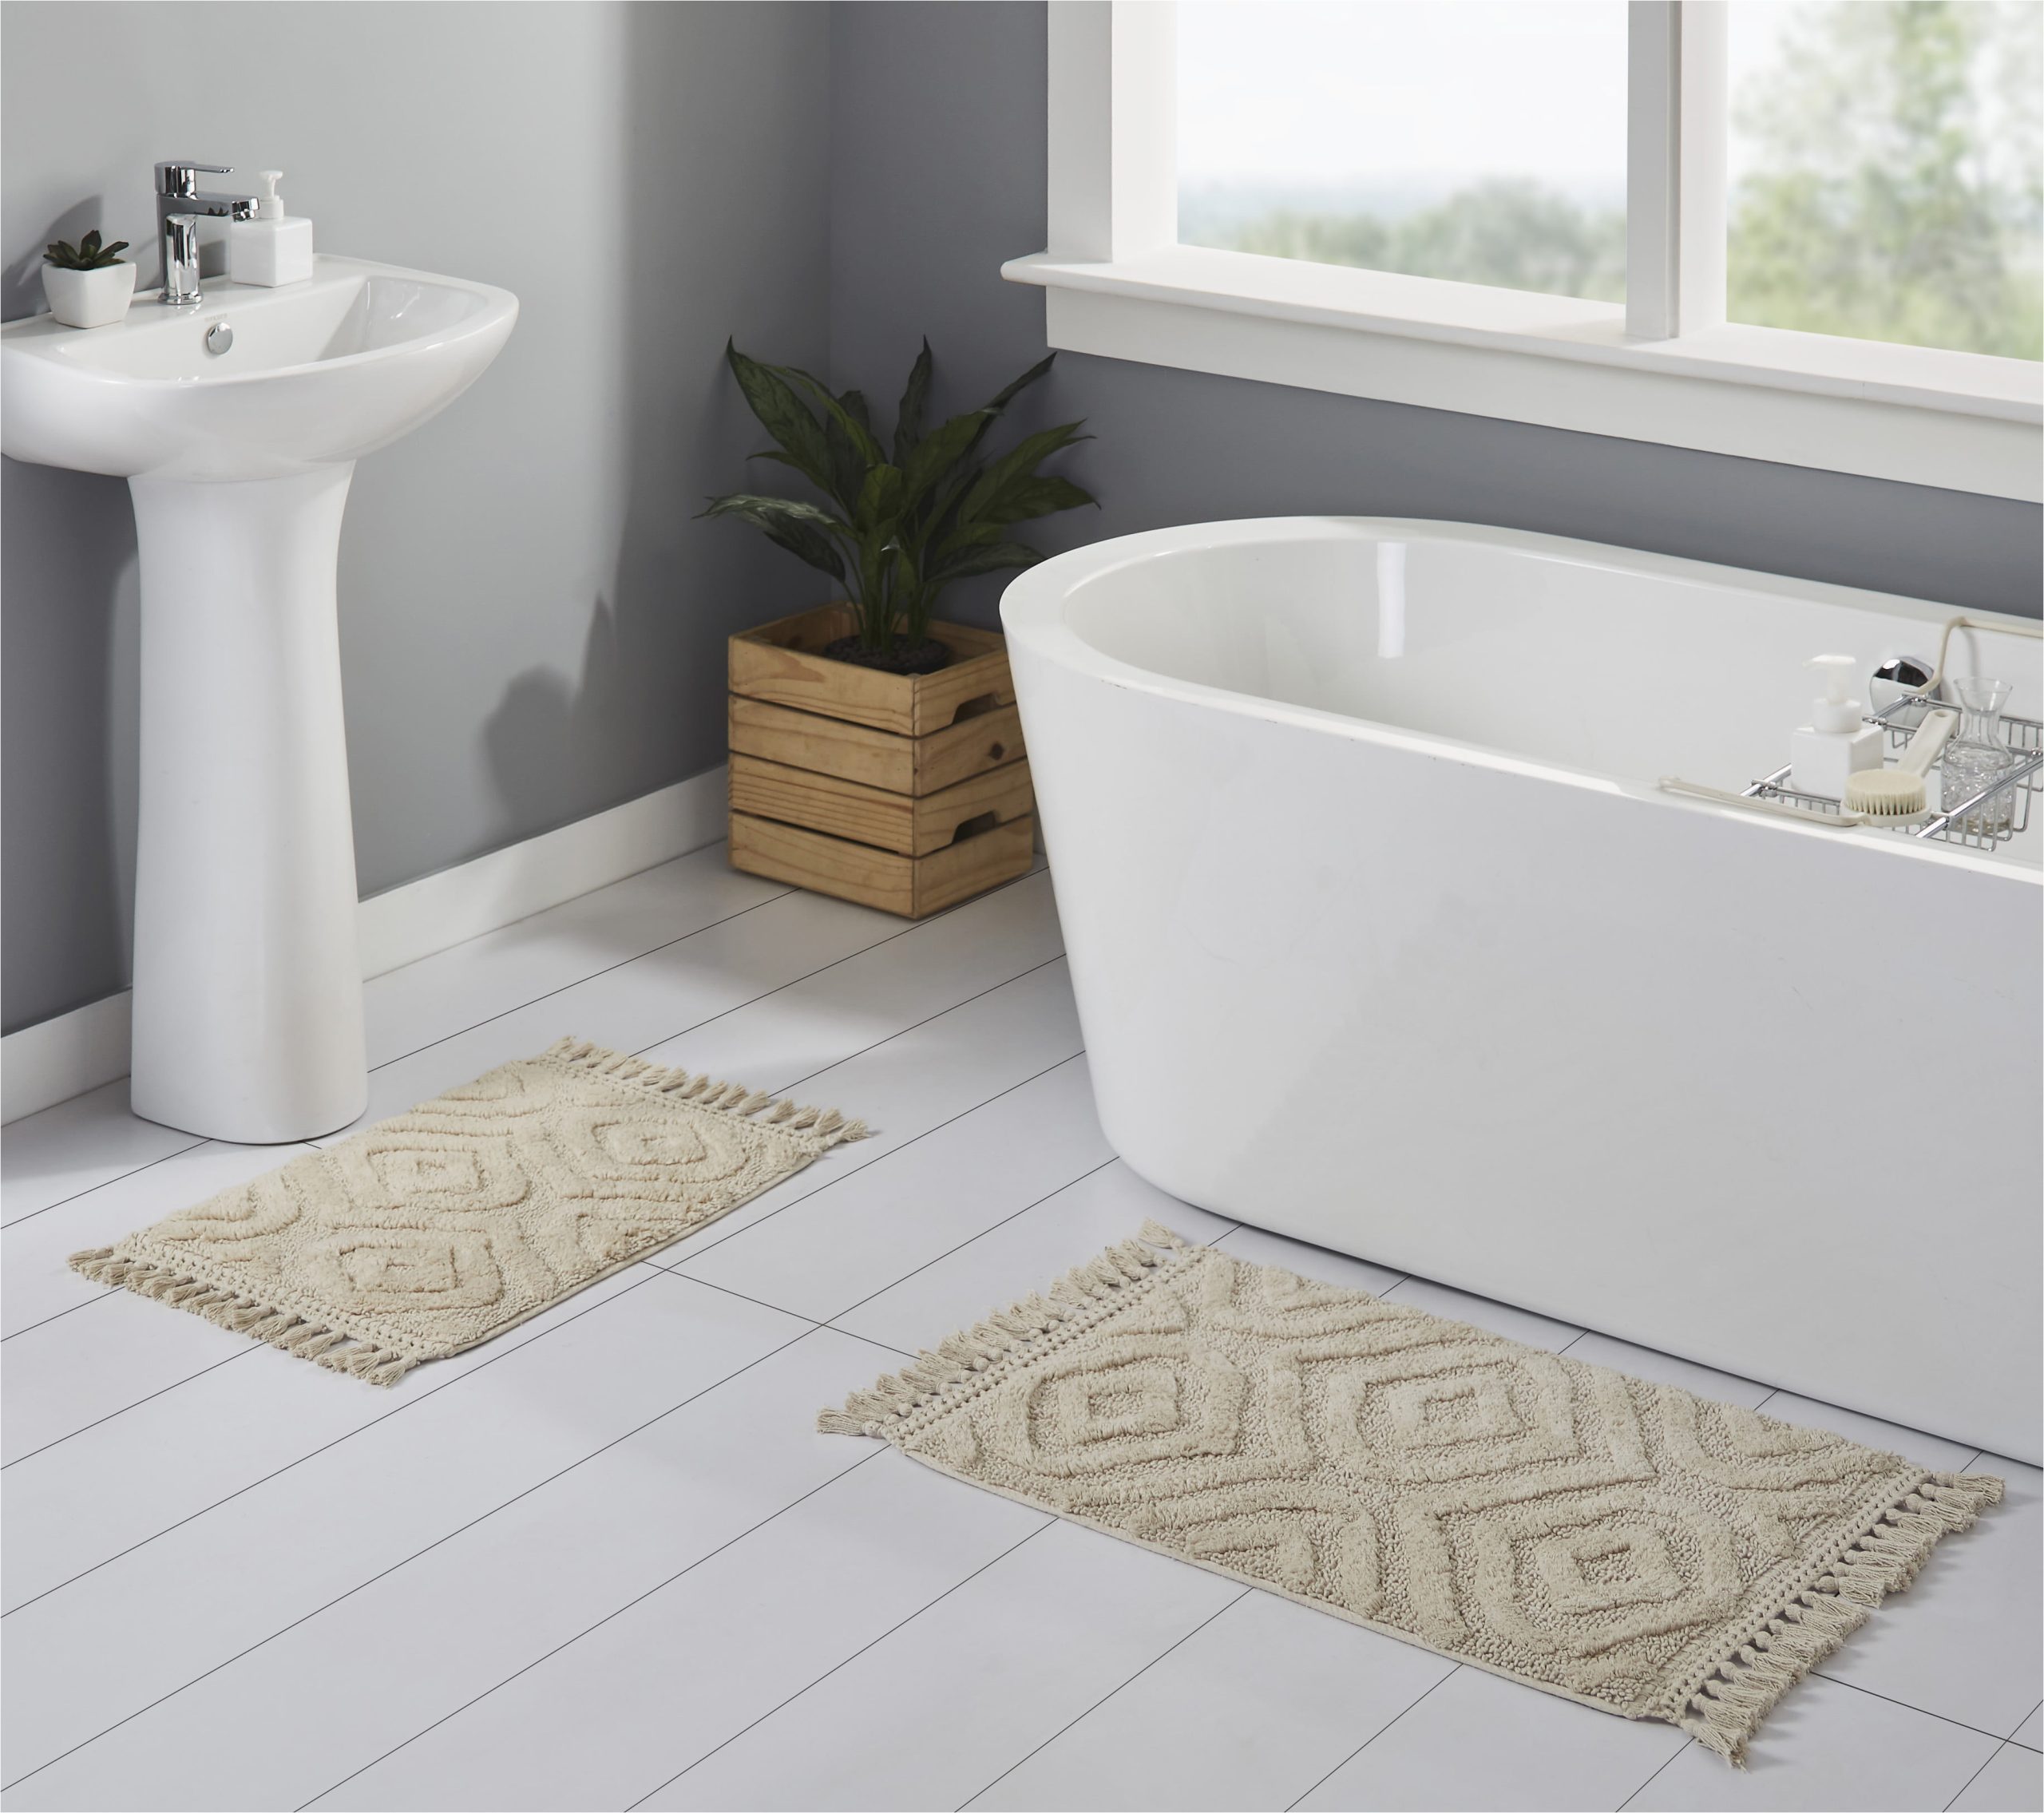 Better Homes and Gardens Bath Rugs Walmart Better Homes and Gardens Tassel Ogee Beige Cotton Bath Rug Set, 2-pieces, In-store Only